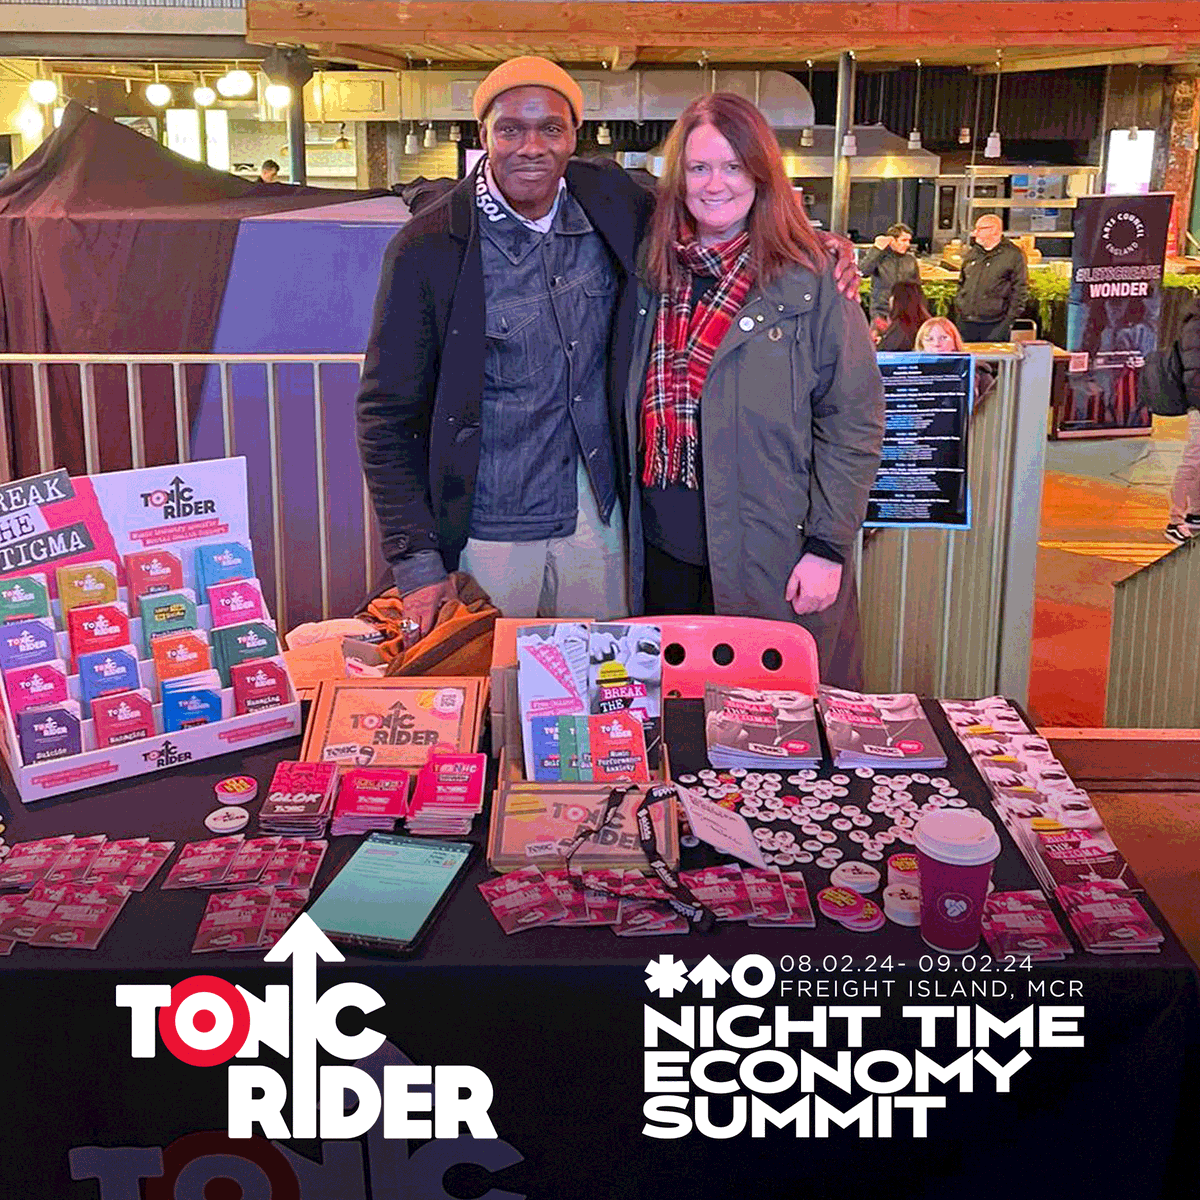 Amazing first day in Manchester at the Night Time Economy Summit. Great to see friend of TONIC Gary Powell from @libertines stop by our stand. #MentalHealth #Music #Tonic #TonicRider #NTES2024 @wearethentia @gdogg27